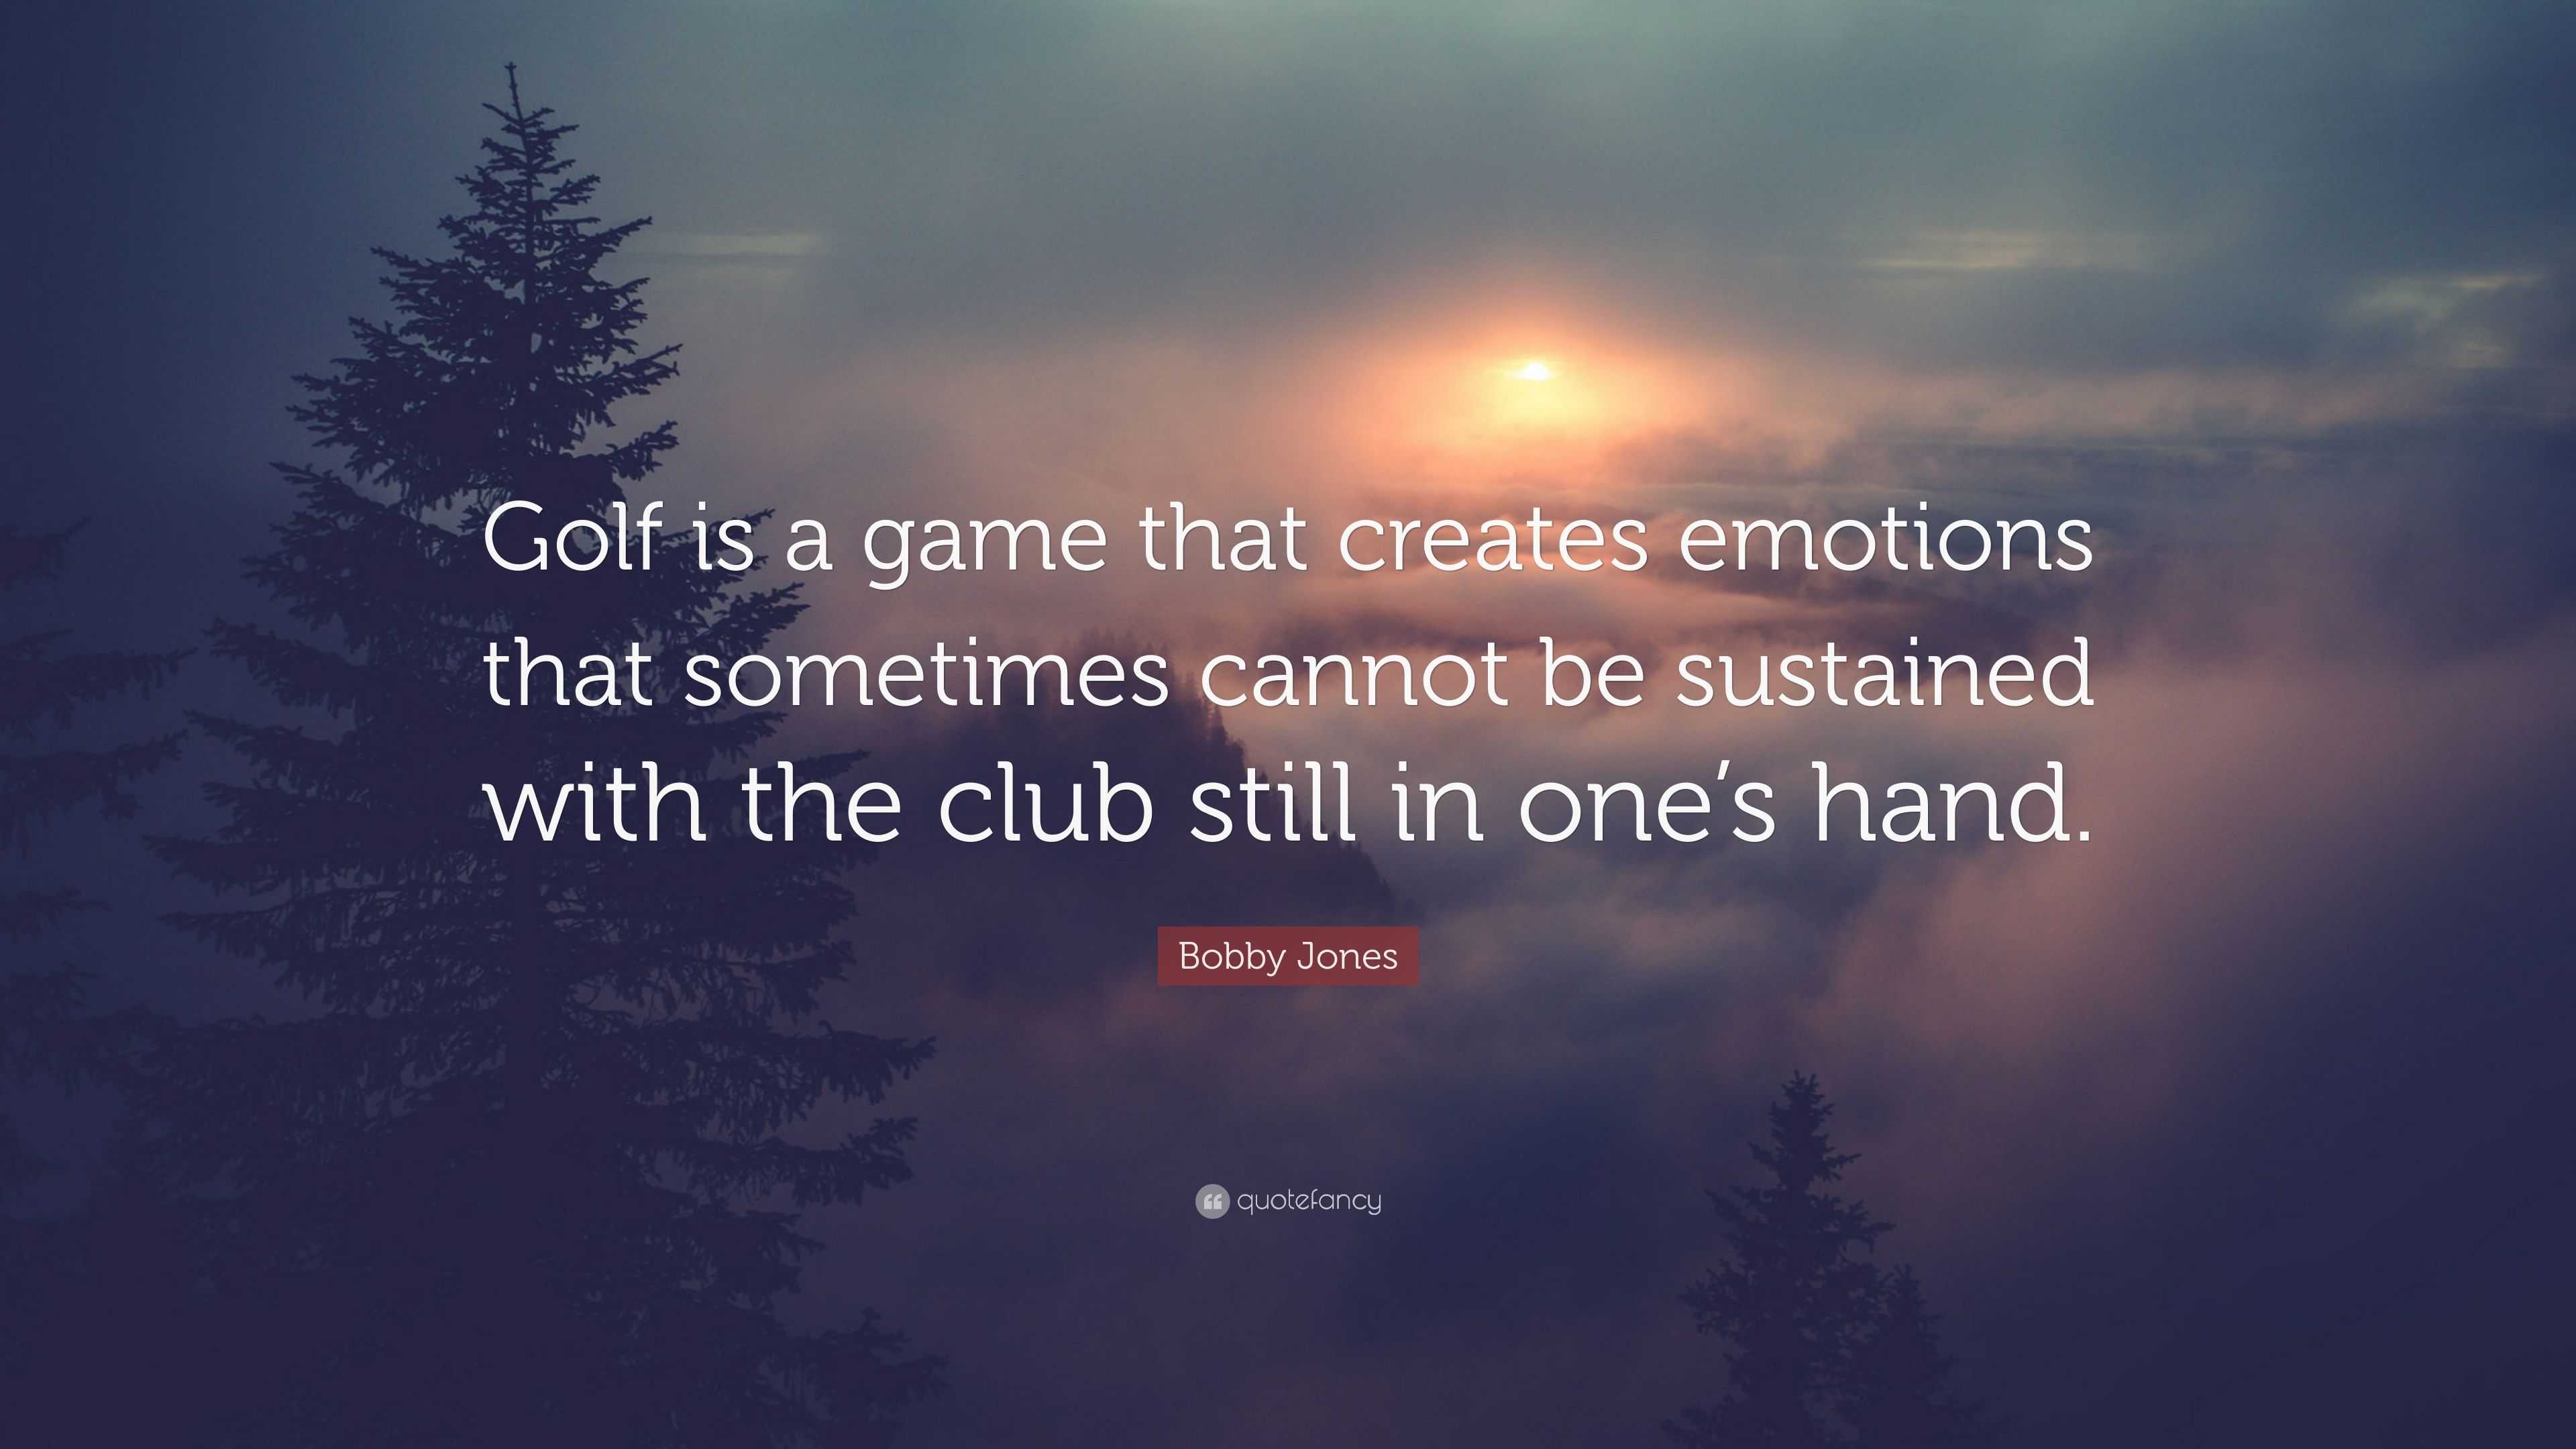 Bobby Jones Quote: “Golf is a game that creates emotions that sometimes ...